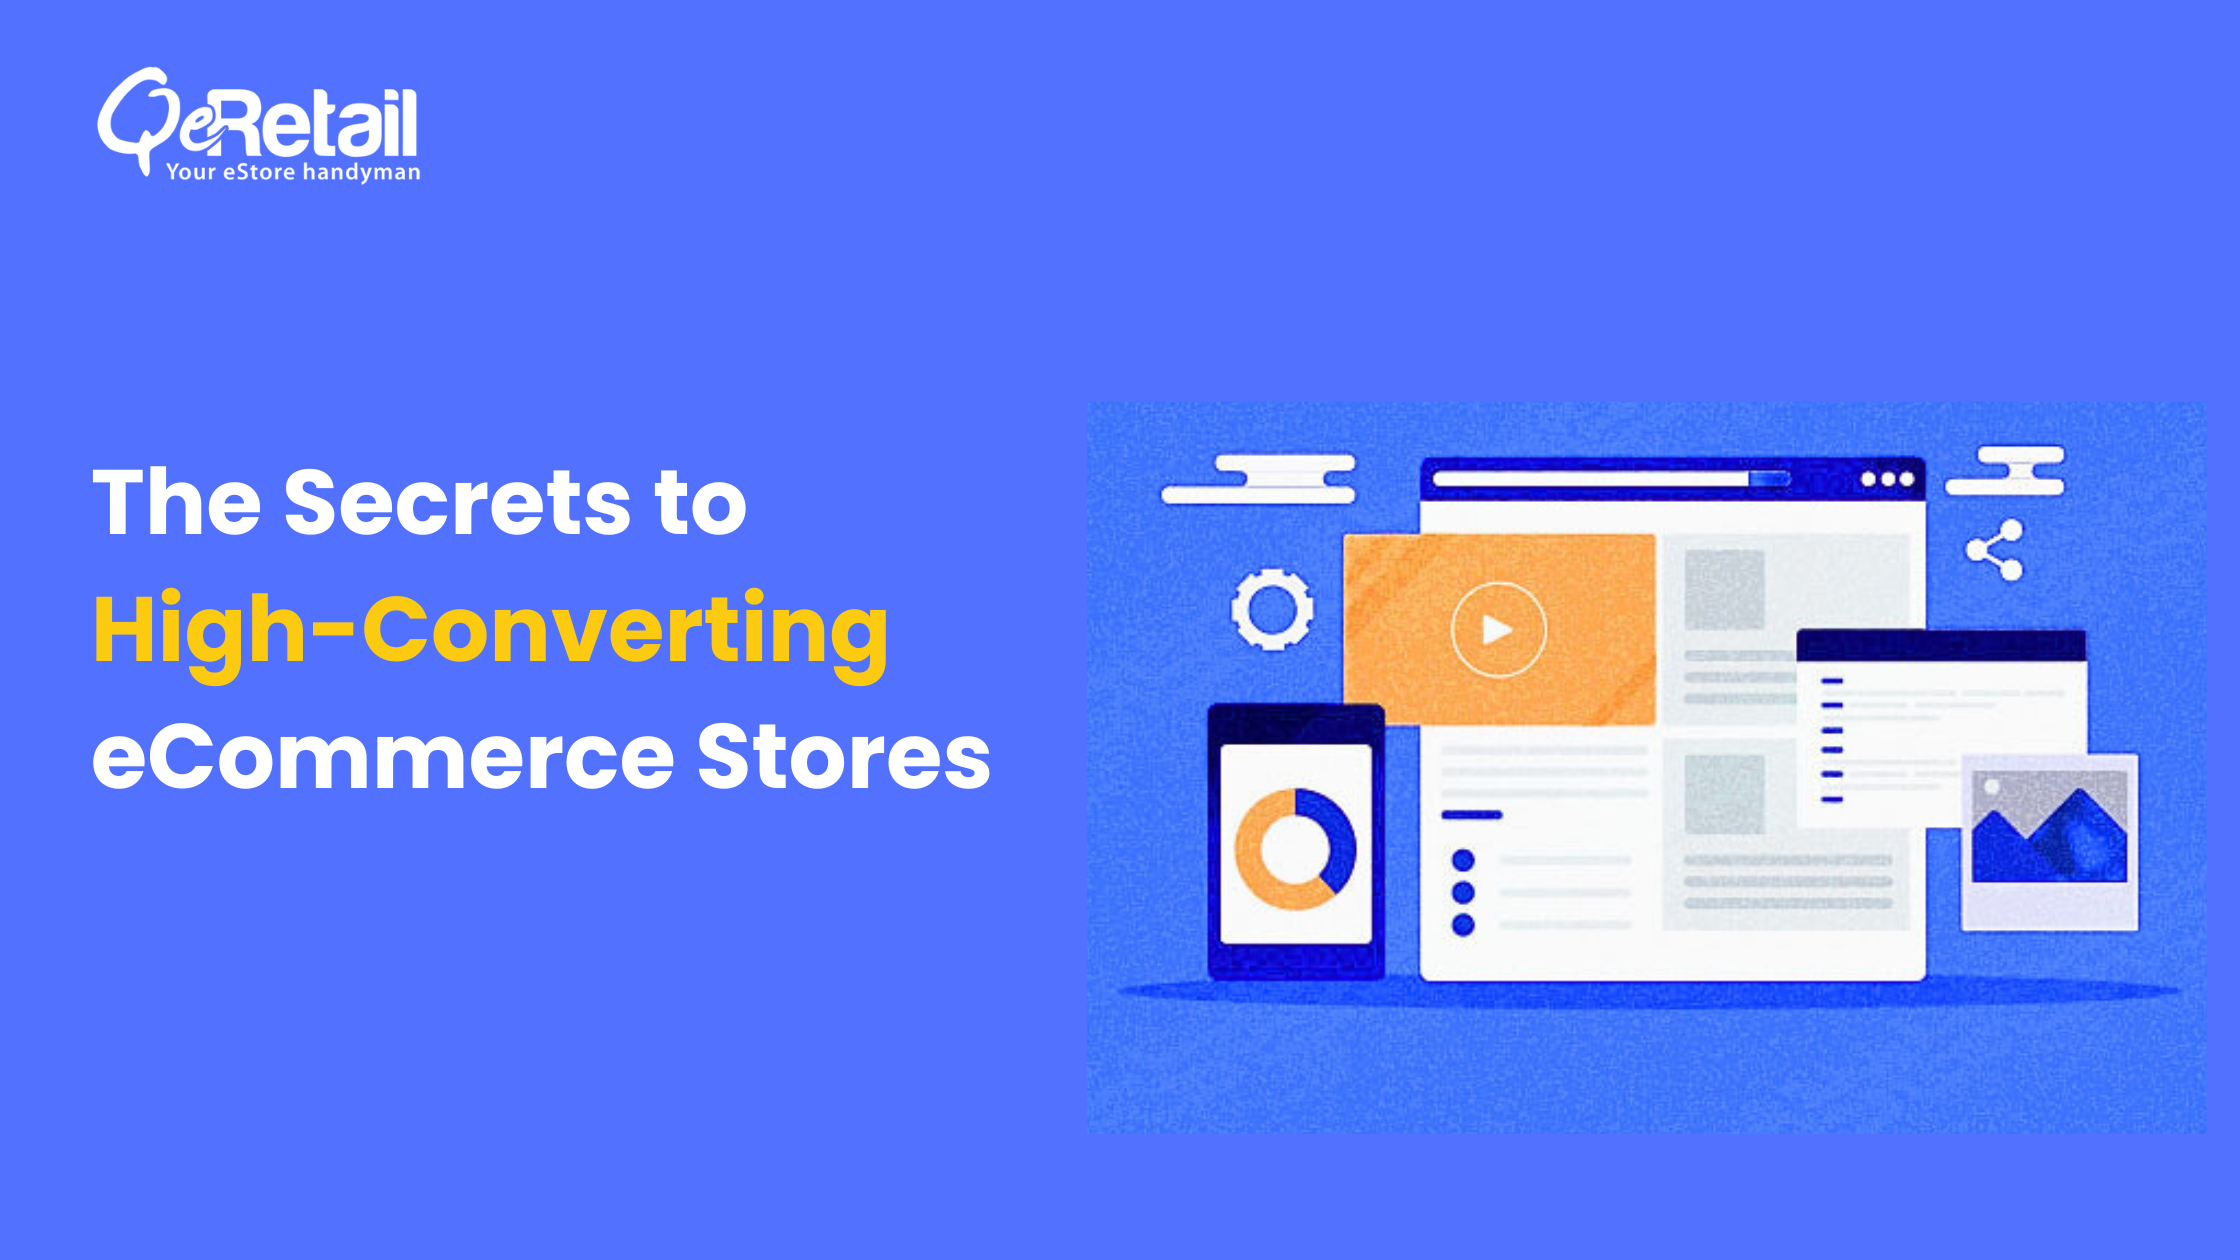 From Low to High Conversions: Learning from Top-performing eCommerce Sites